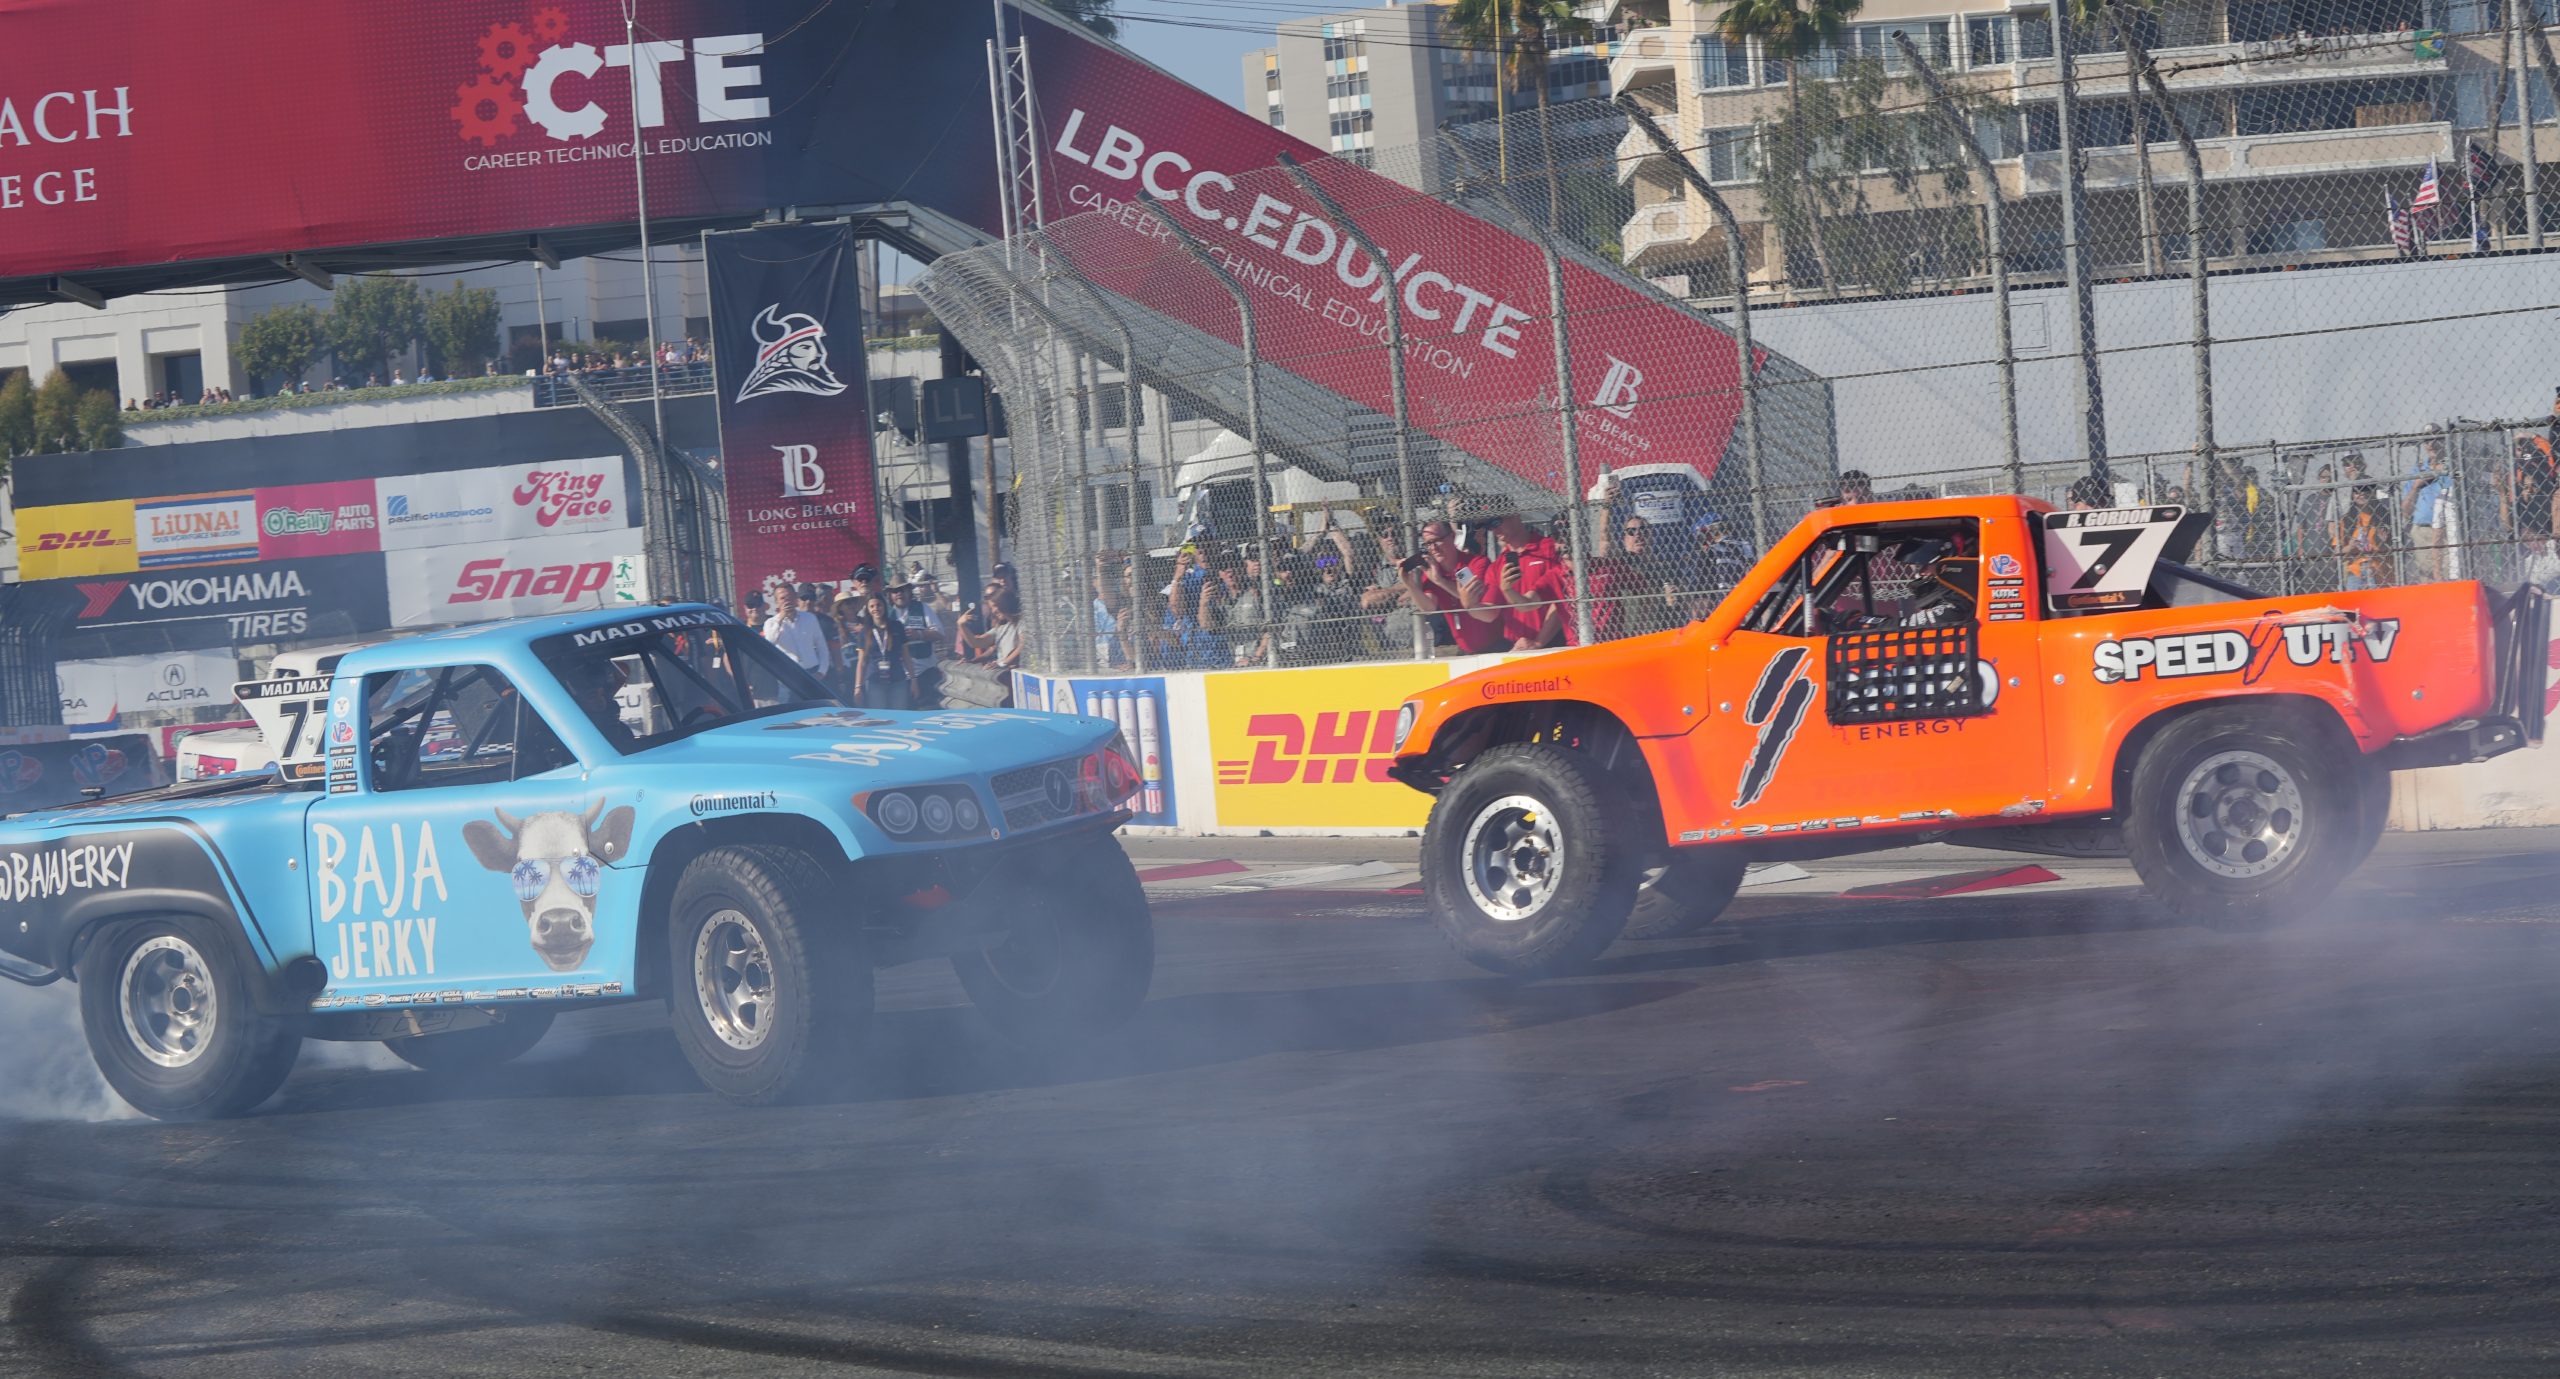 2022 AGPLB Max and Robby T10 donuts crop